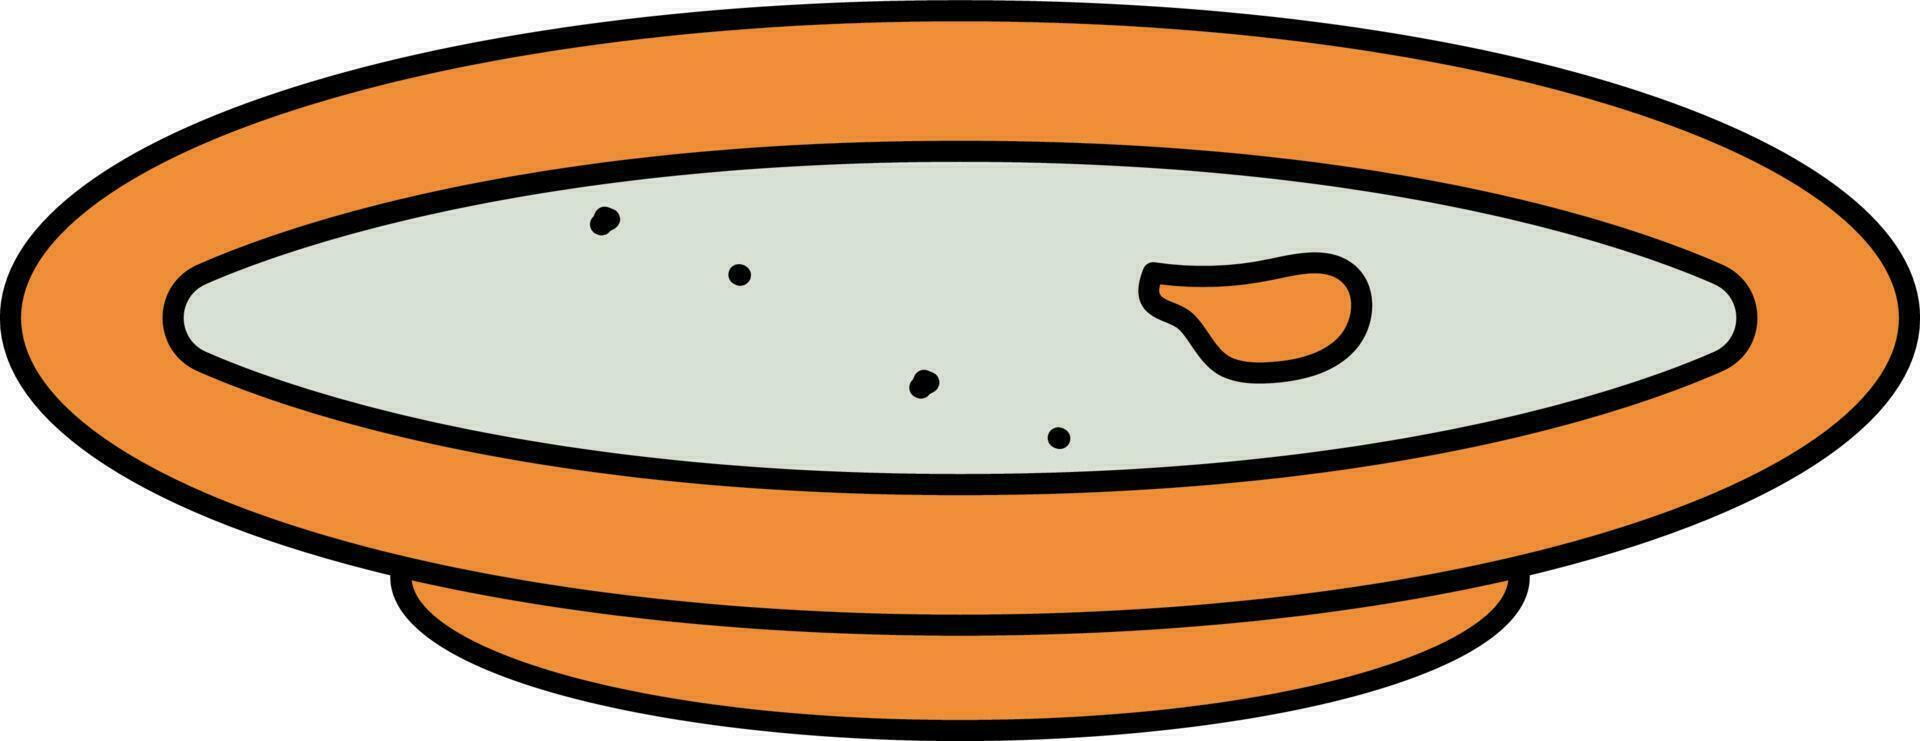 Uncelan Or Leftover Food Plate Icon In Orange And Grey Color. vector